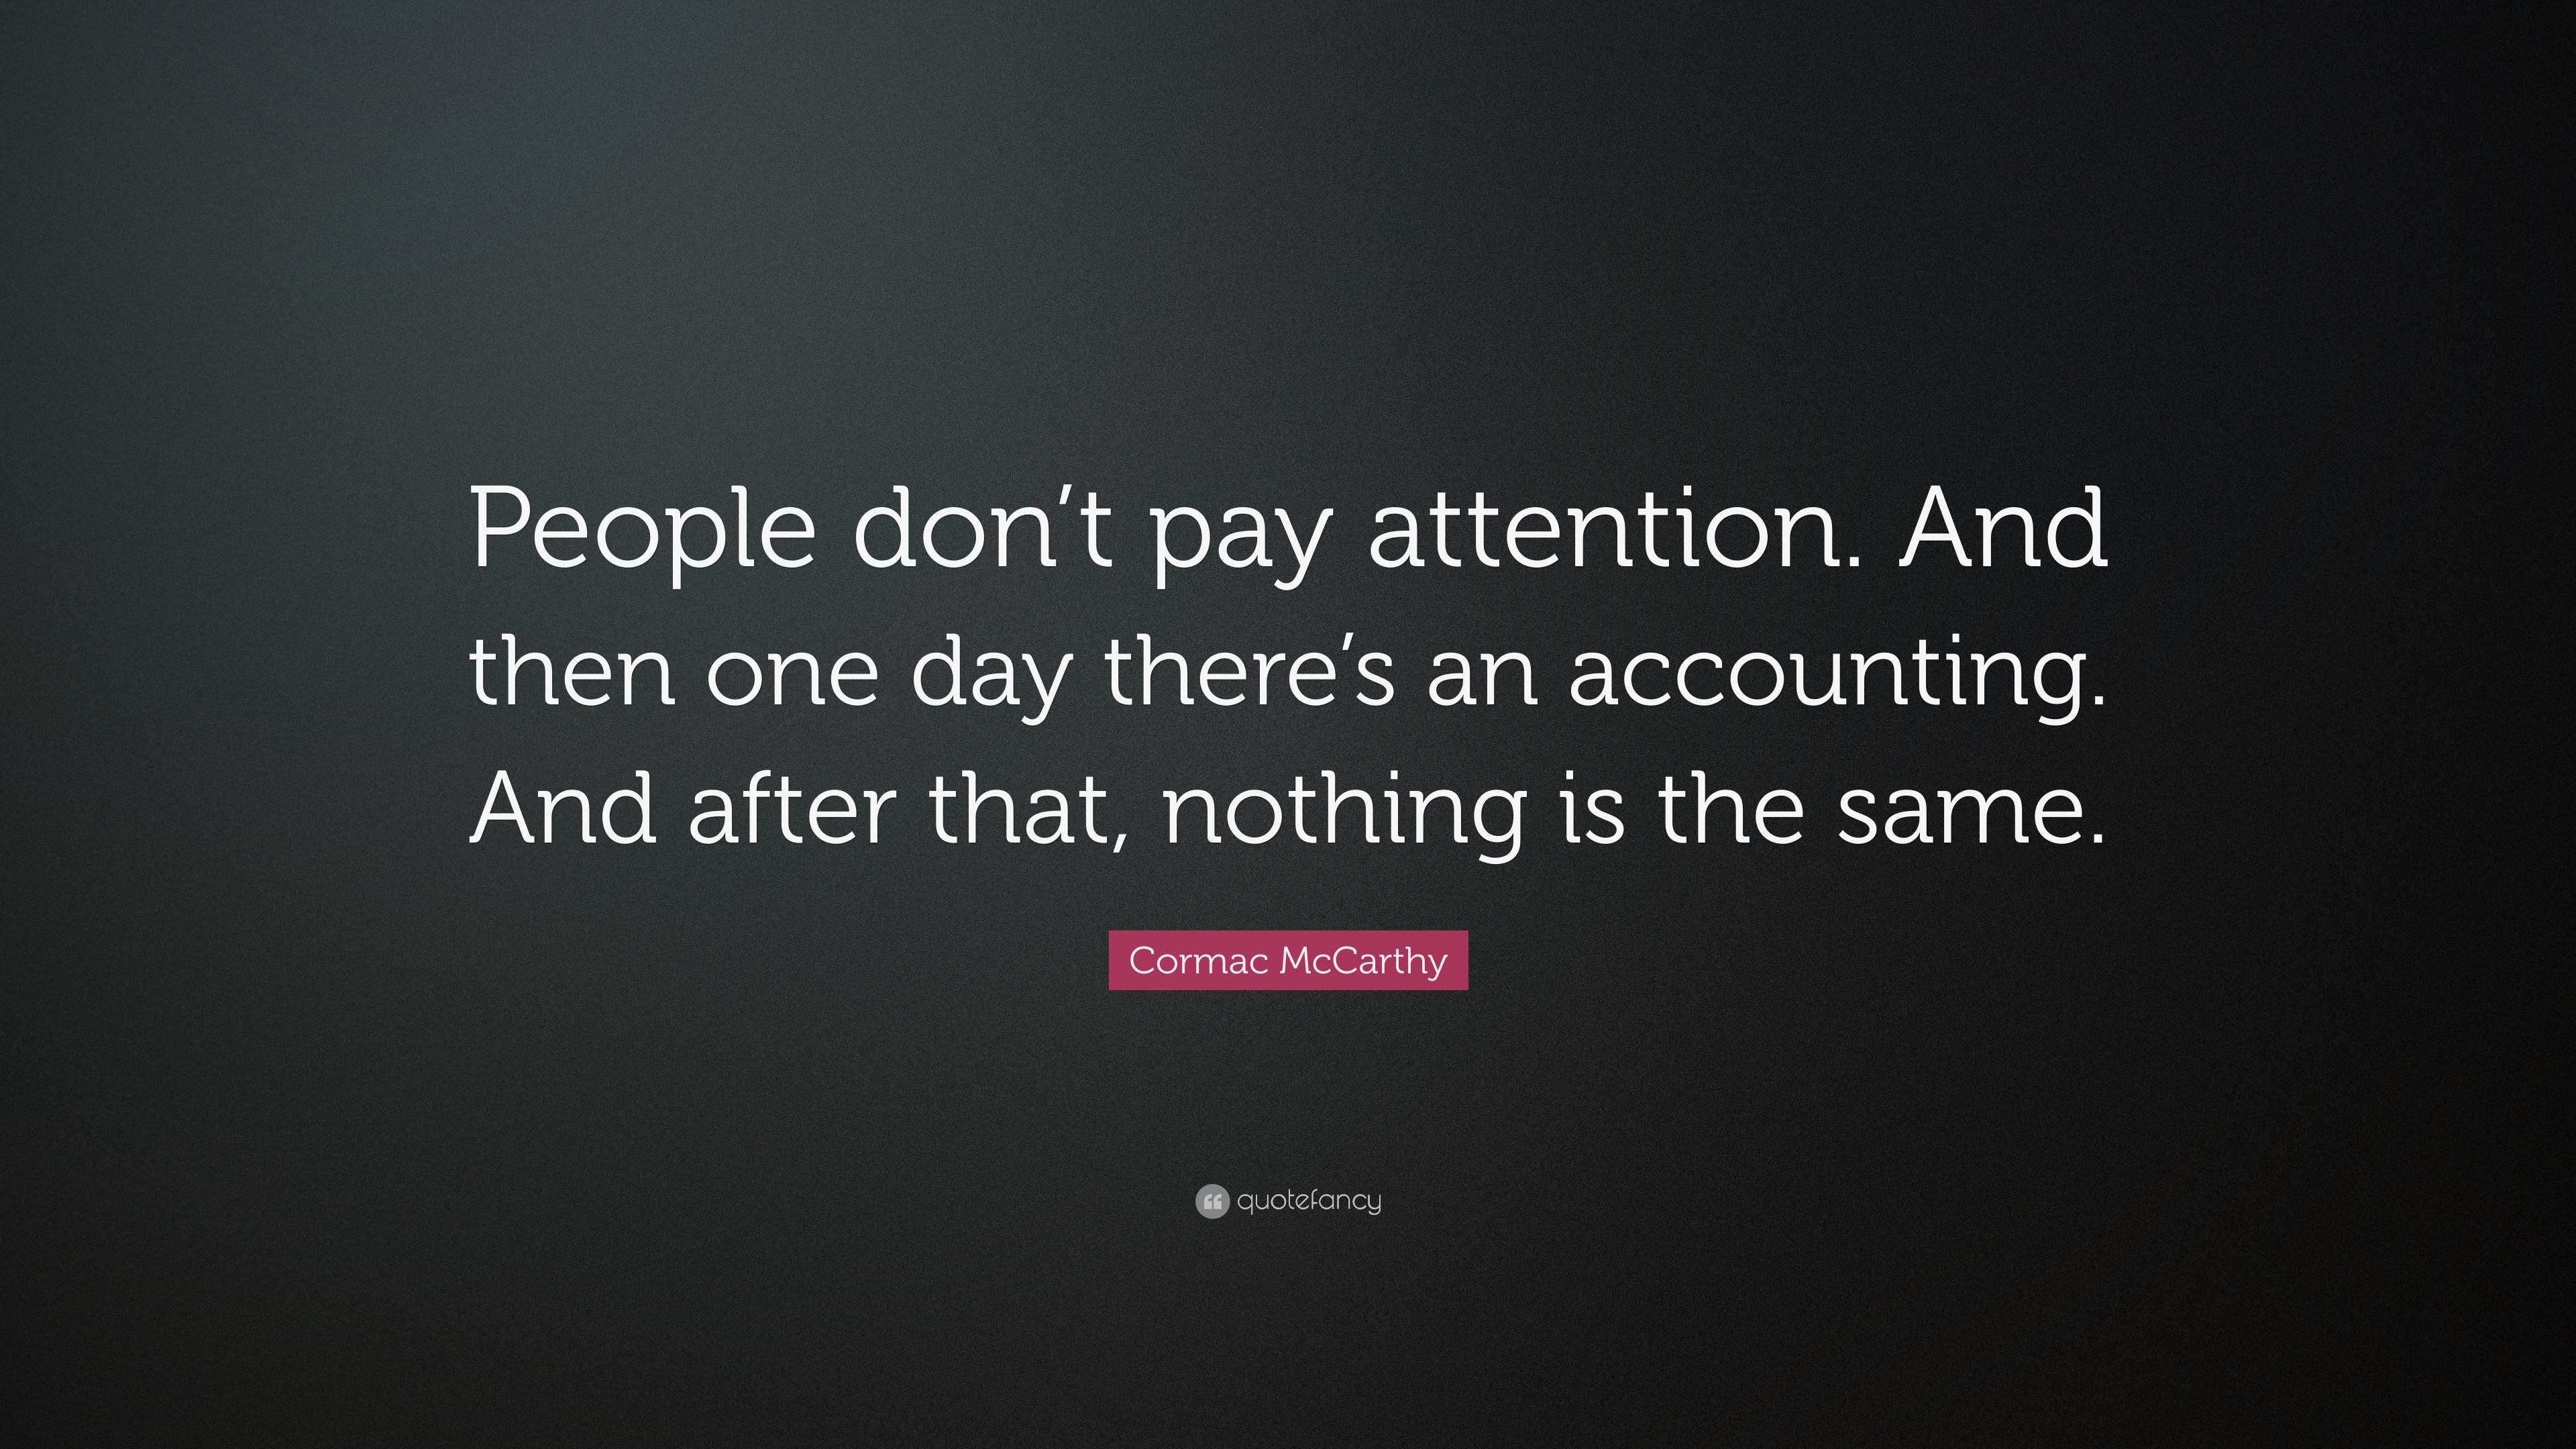 Cormac McCarthy Quote: “People don’t pay attention. And then one day ...